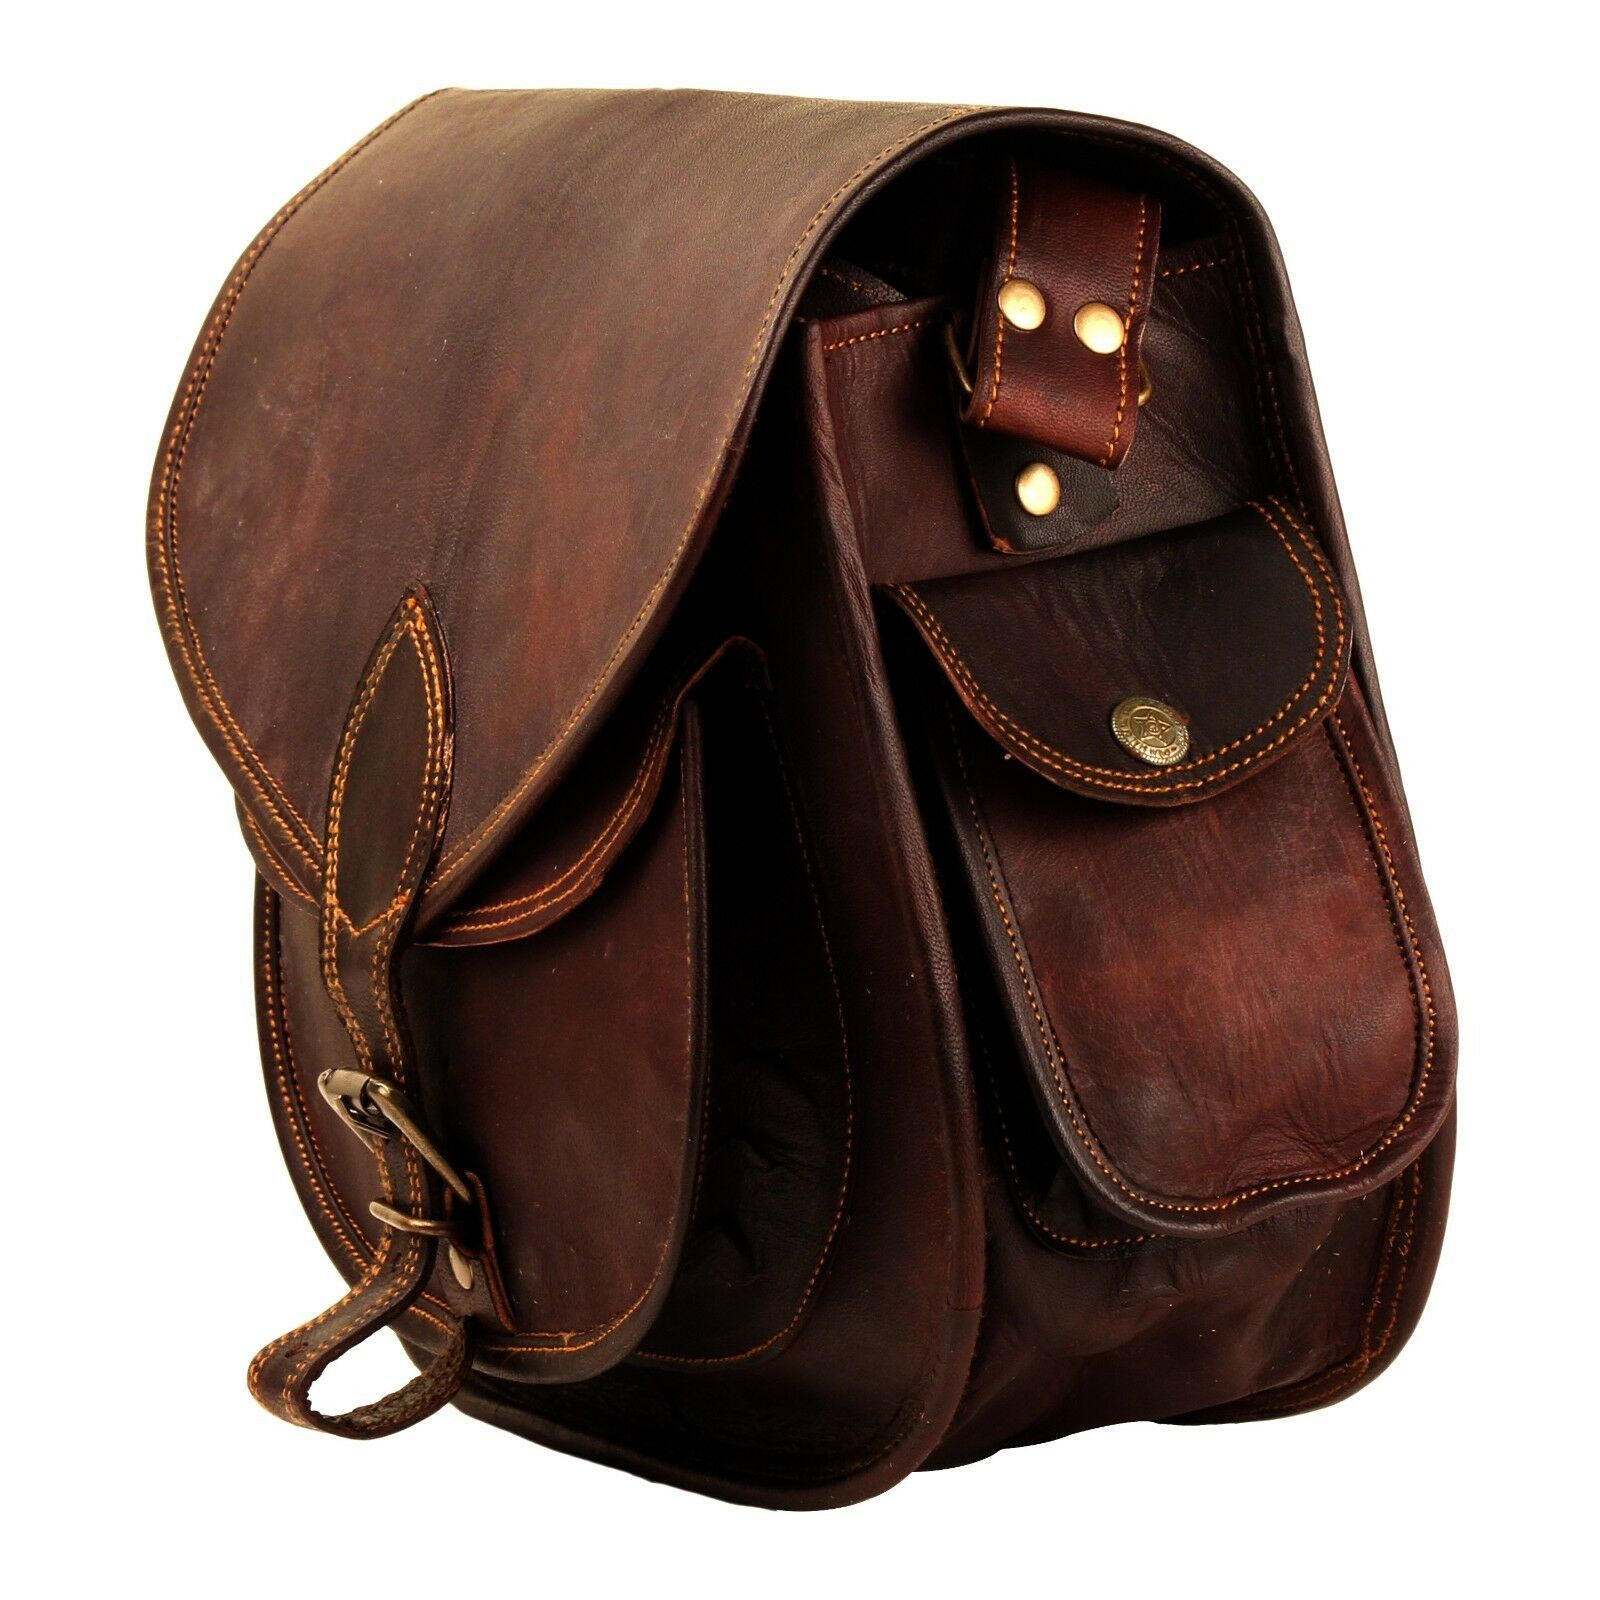 10x13 Inches Hanbags Brown Leather Cross Body Messenger Bag For Women - Women&#39;s Handbags & Bags